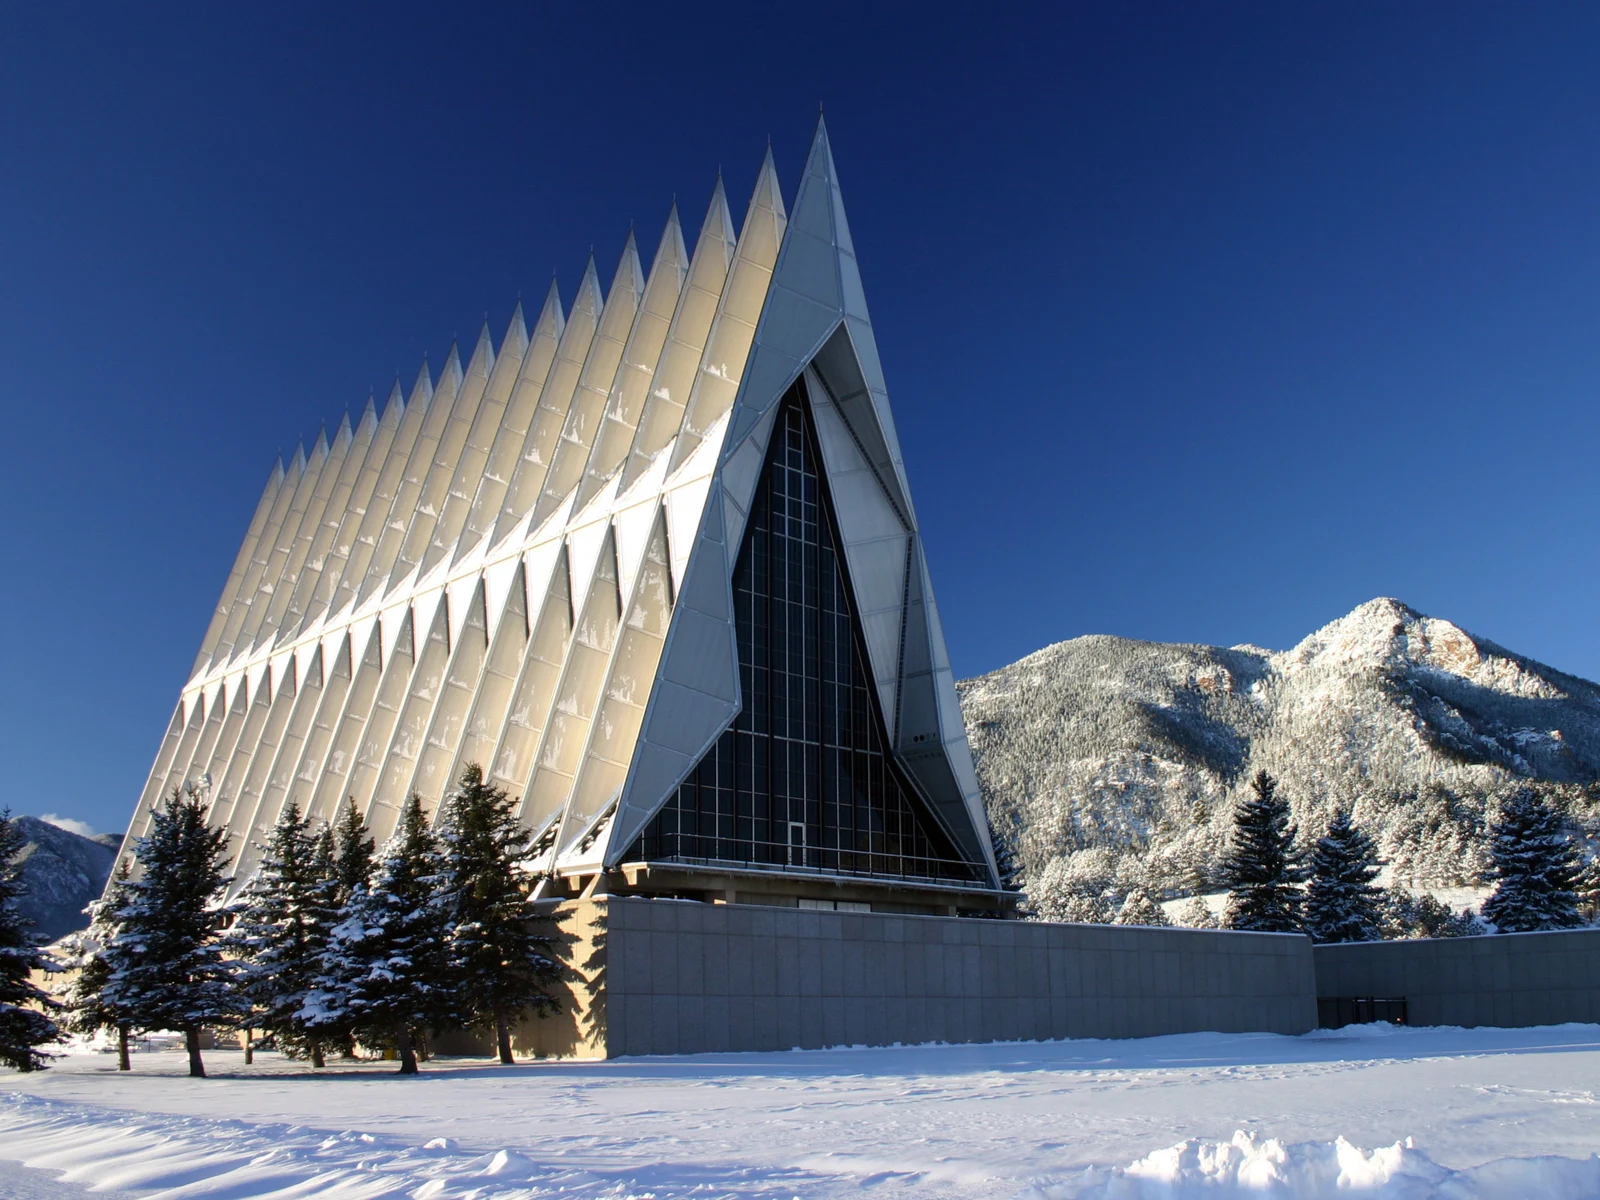 Air Force Academy Chapel as one of the best things to do in Colorado Springs